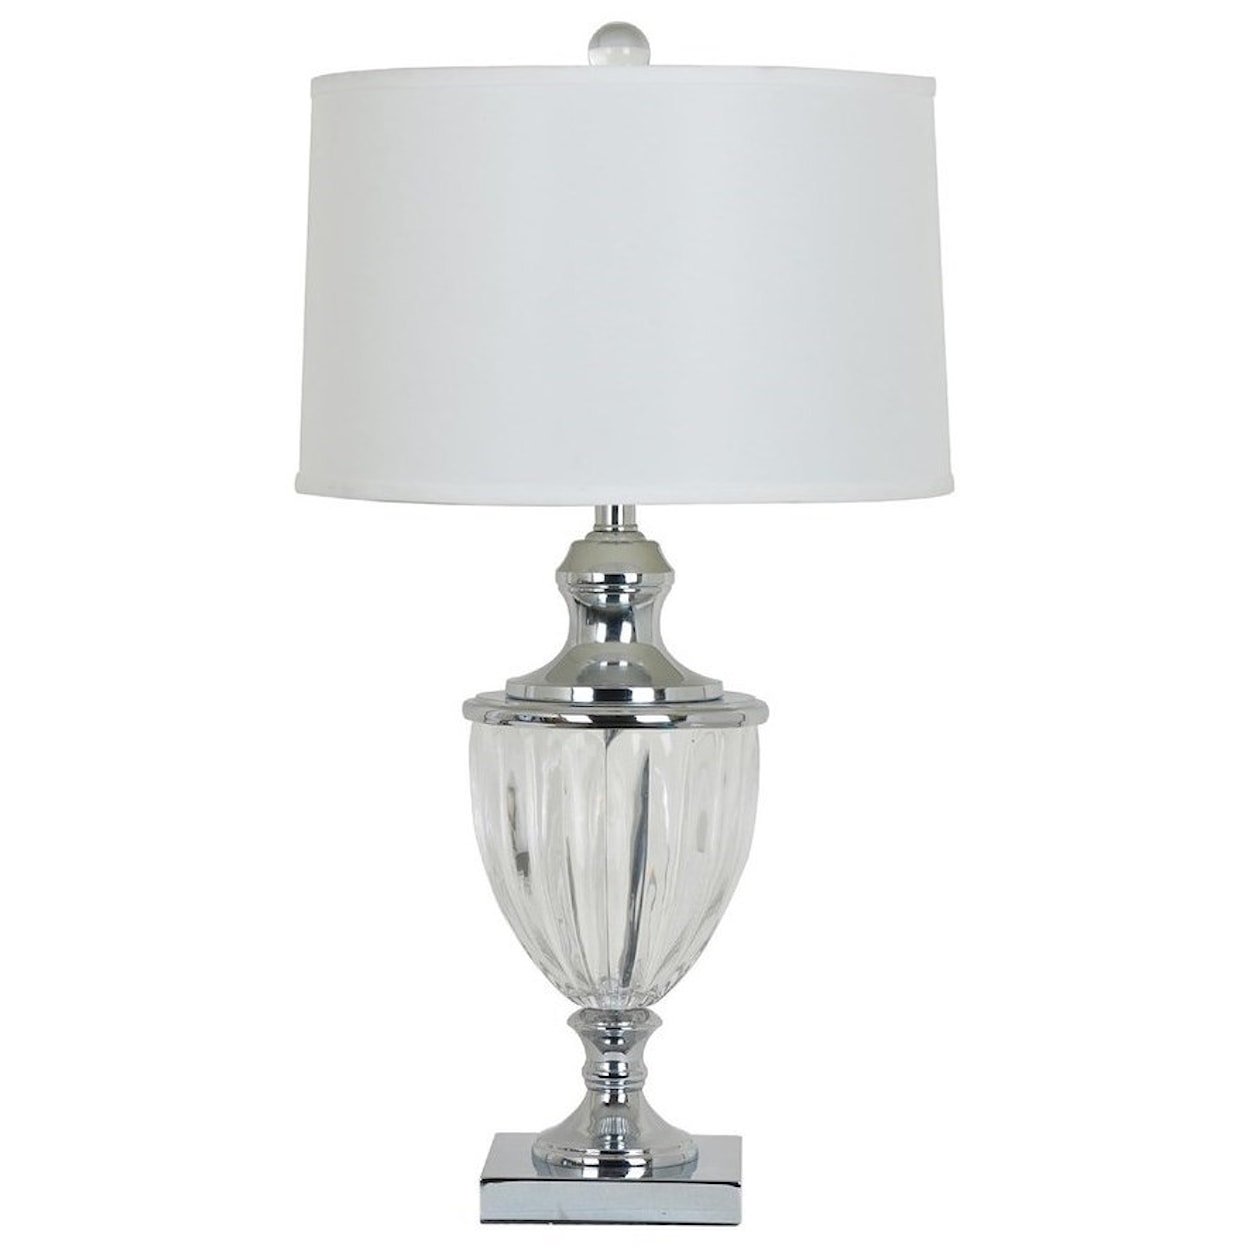 Crestview Collection Lighting Carlton Table Lamp